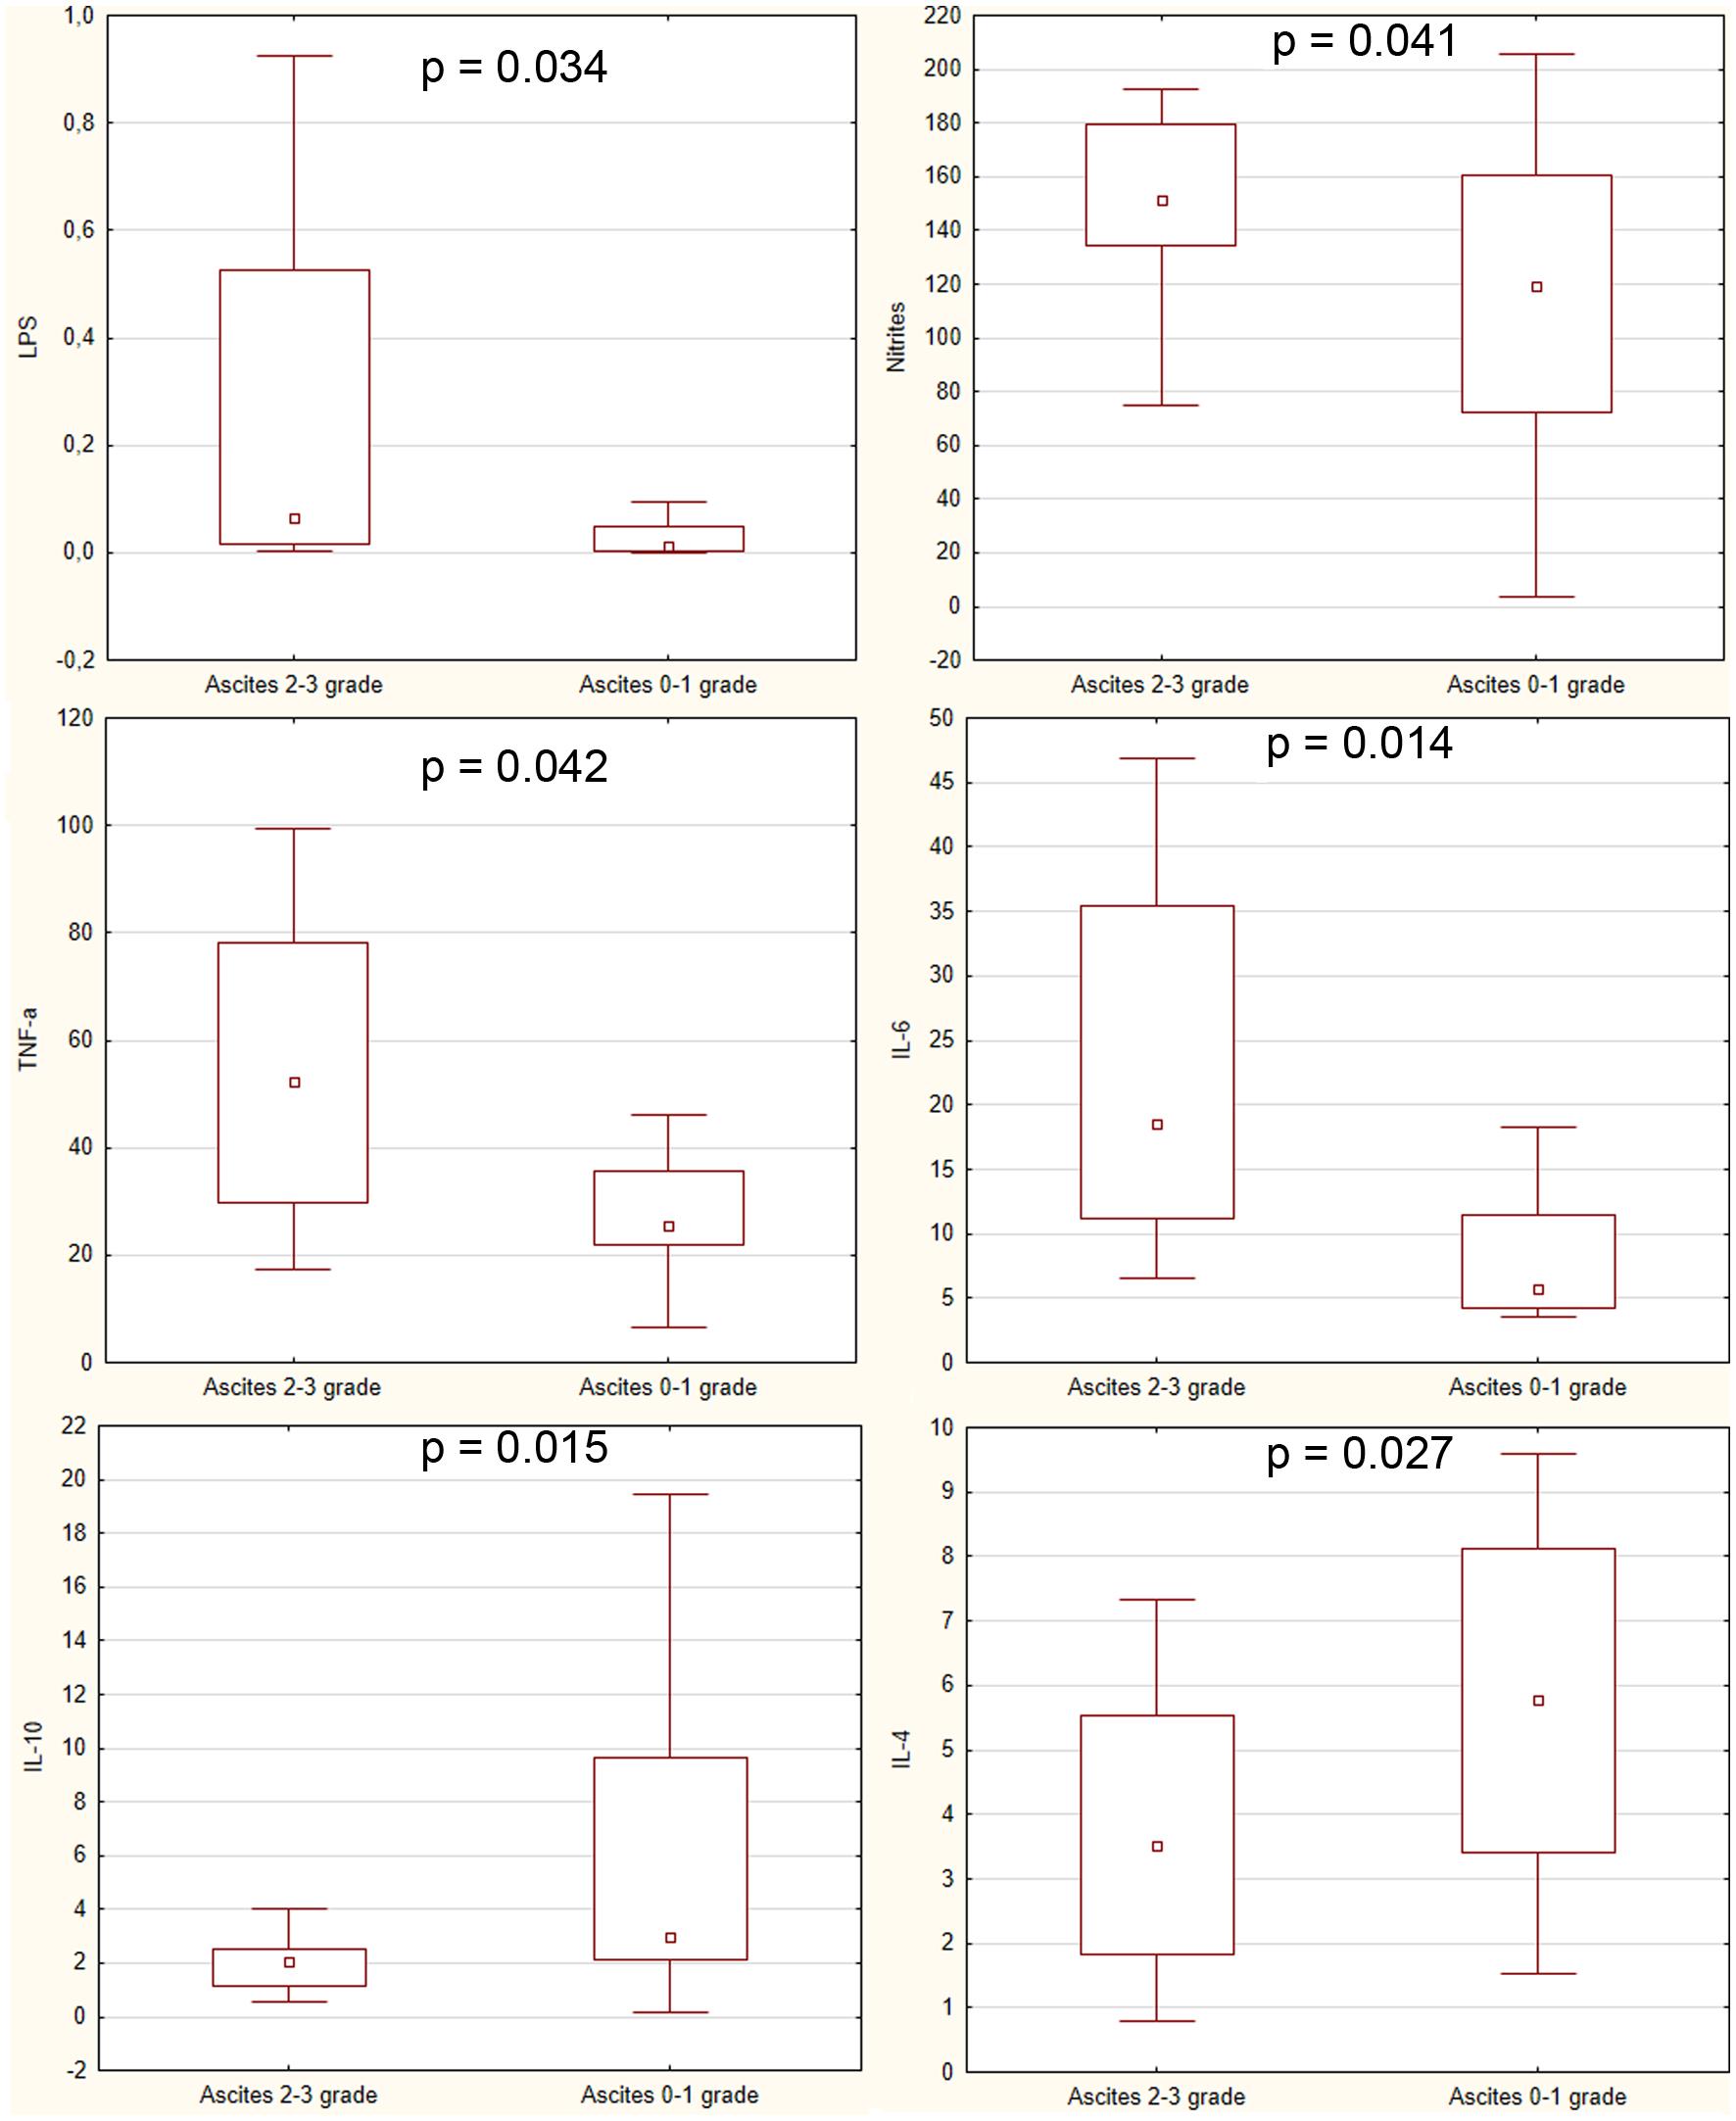 Differences in plasma levels of lipopolysaccharide (LPS) (EU/mL), nitrite (µmol/L), TNF-a (pg/mL), IL-6 (pg/mL), IL-10 (pg/mL) and IL-4 (pg/mL) between patients with clinically significant ascites (grade 2–3) and those without this complication of cirrhosis.